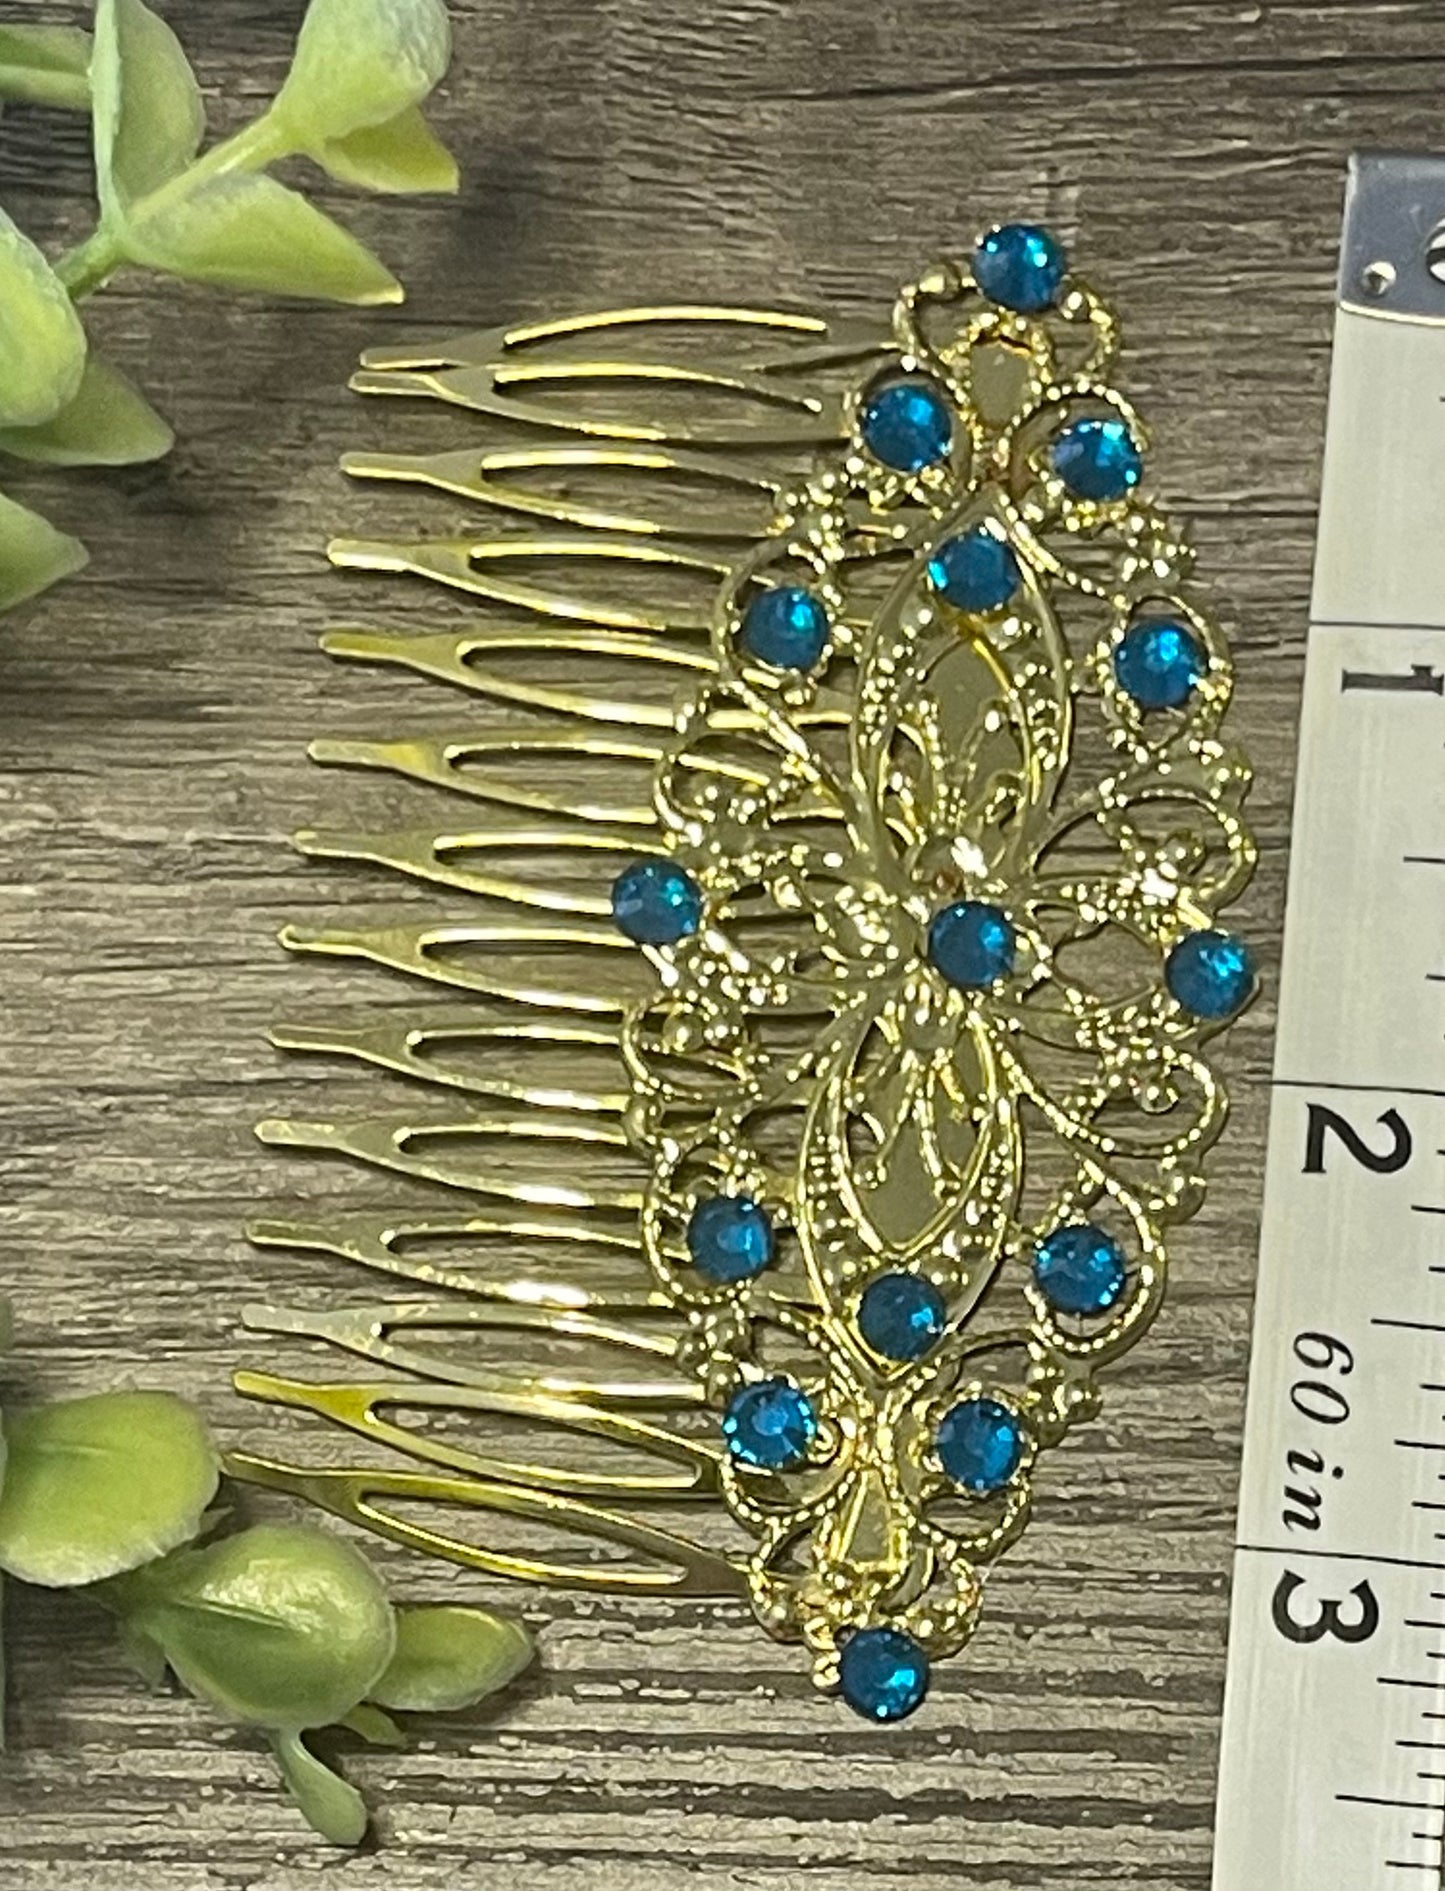 Sapphire teal crystal rhinestone Comb on 3.5” Gold Metal Hair Comb accessory Handmade Retro Bridal Party Prom